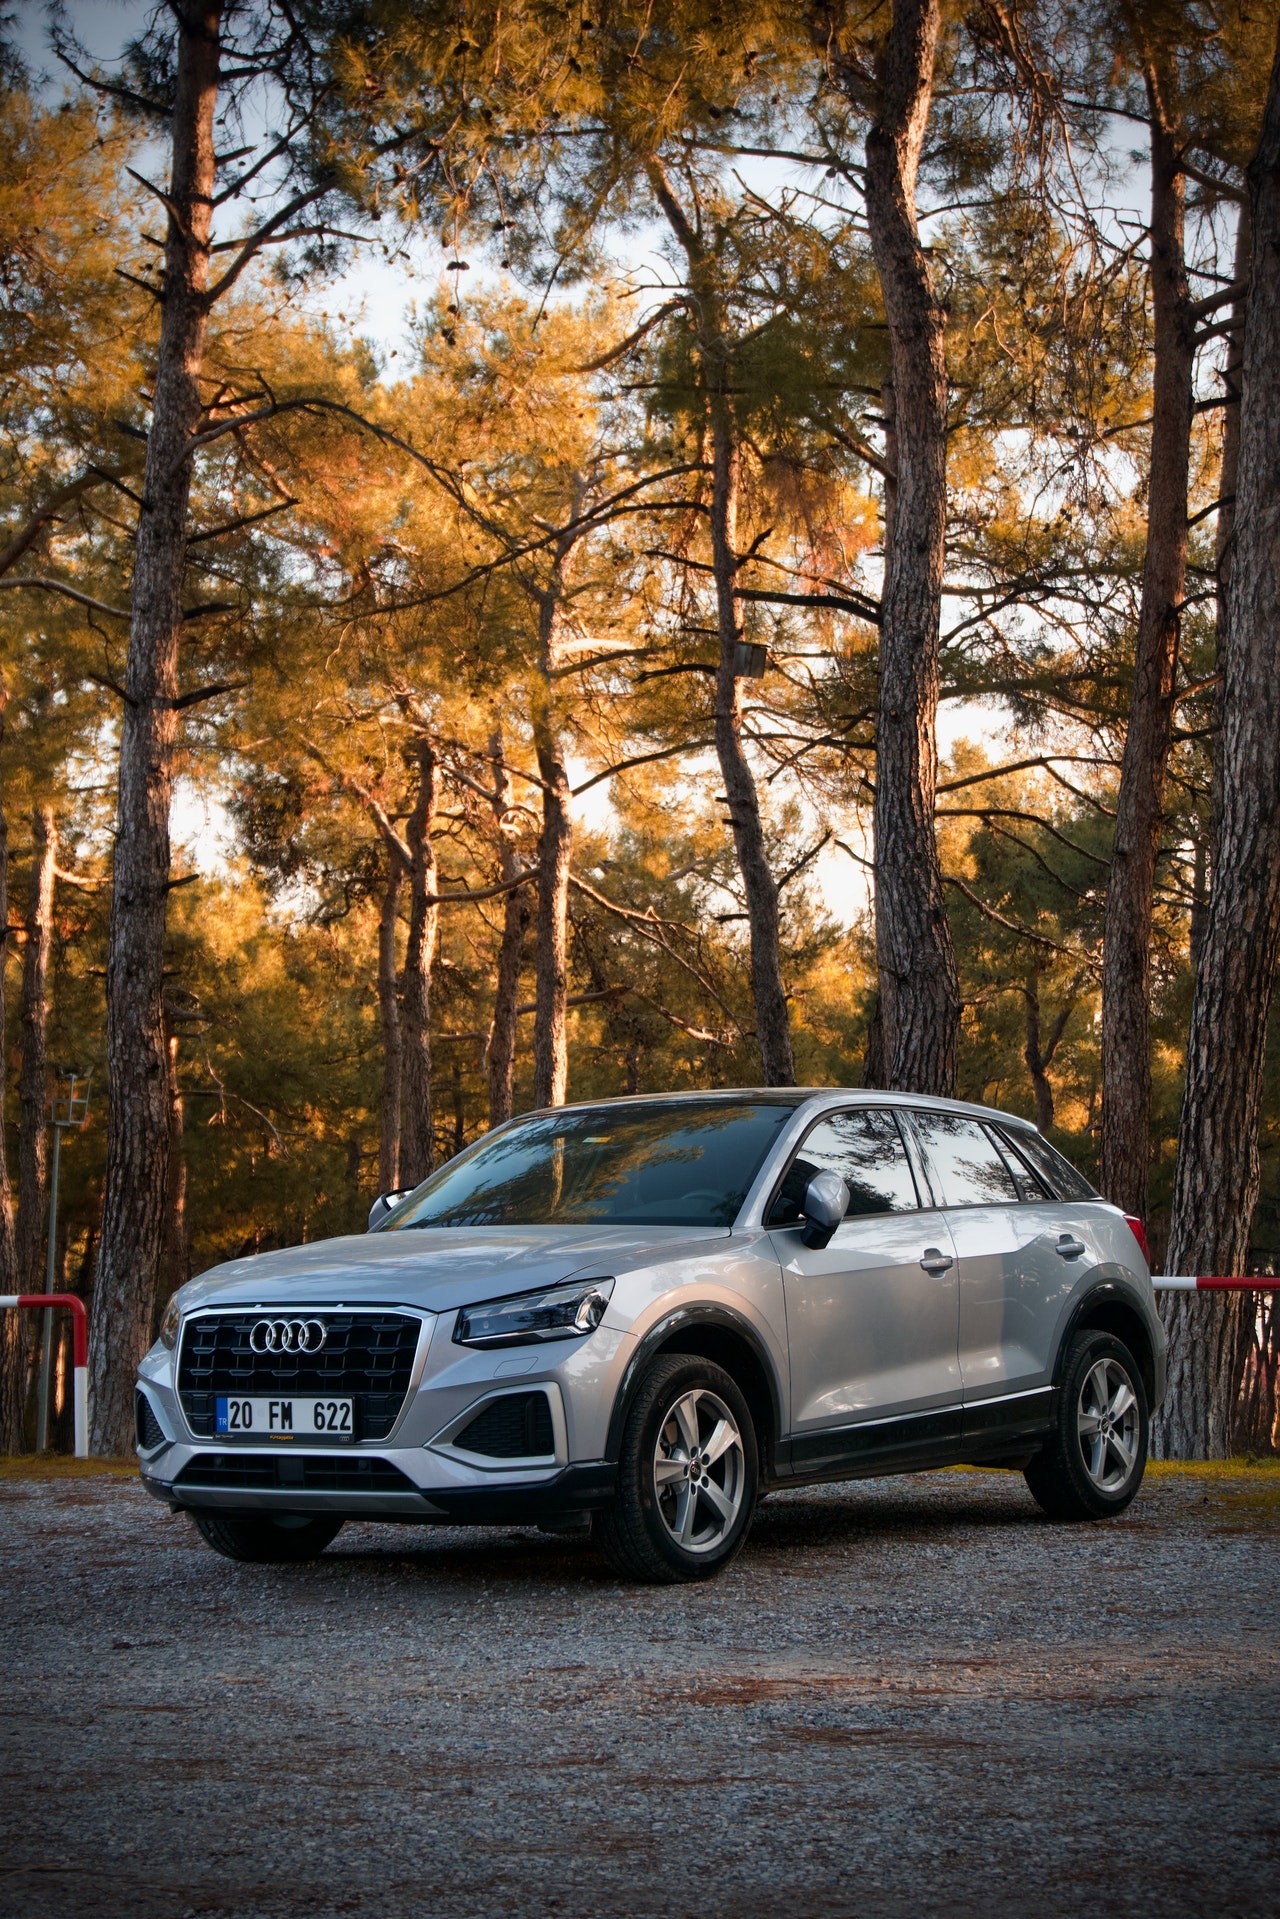 Reasons you should be interested in purchasing the Audi Q2